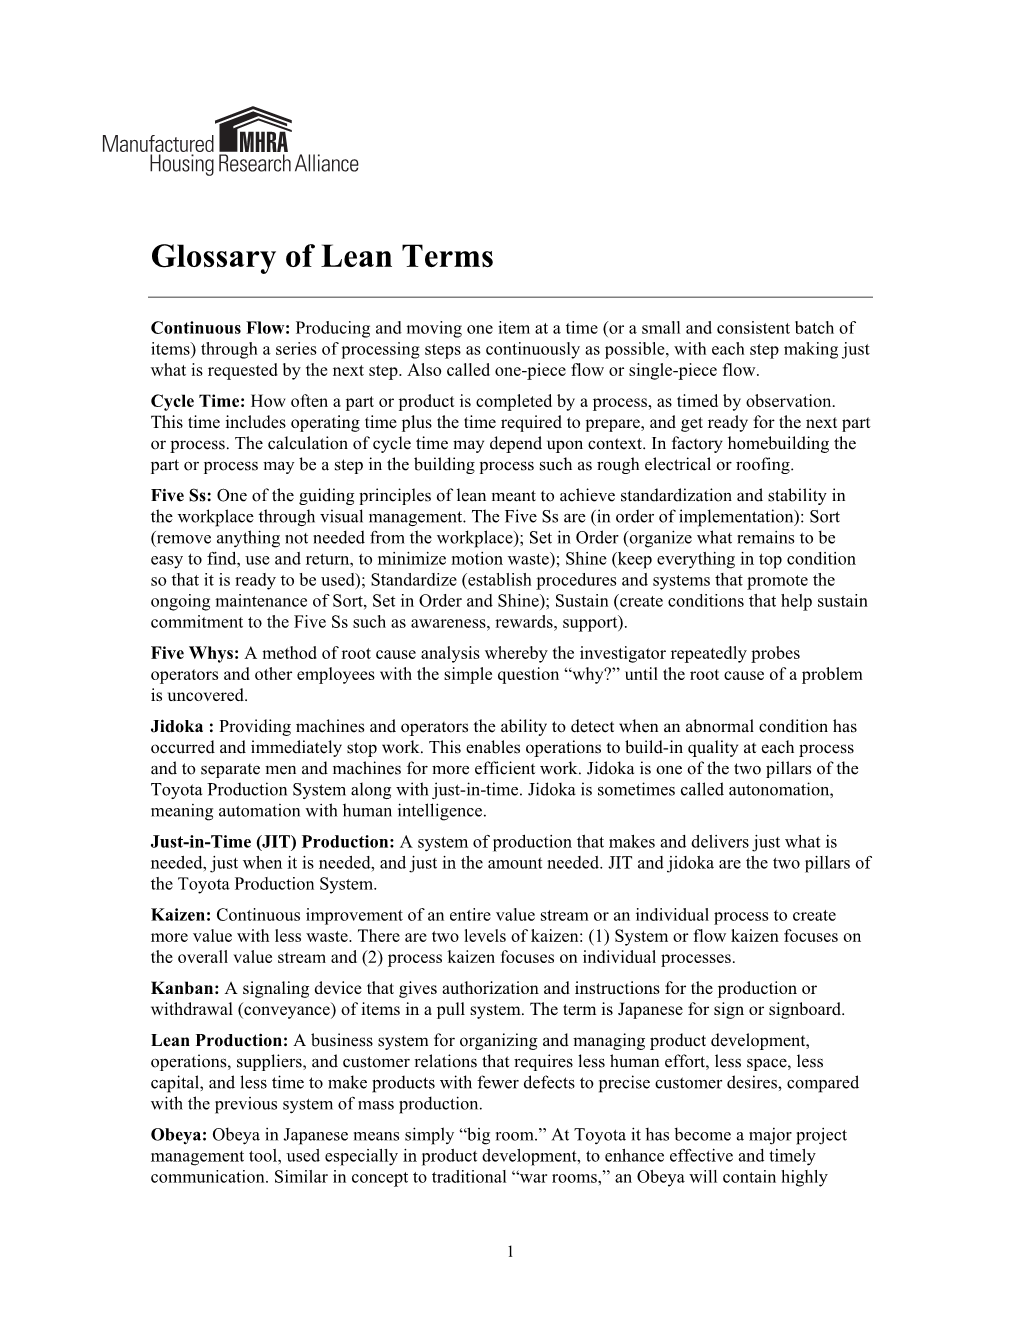 Glossary of Lean Terms